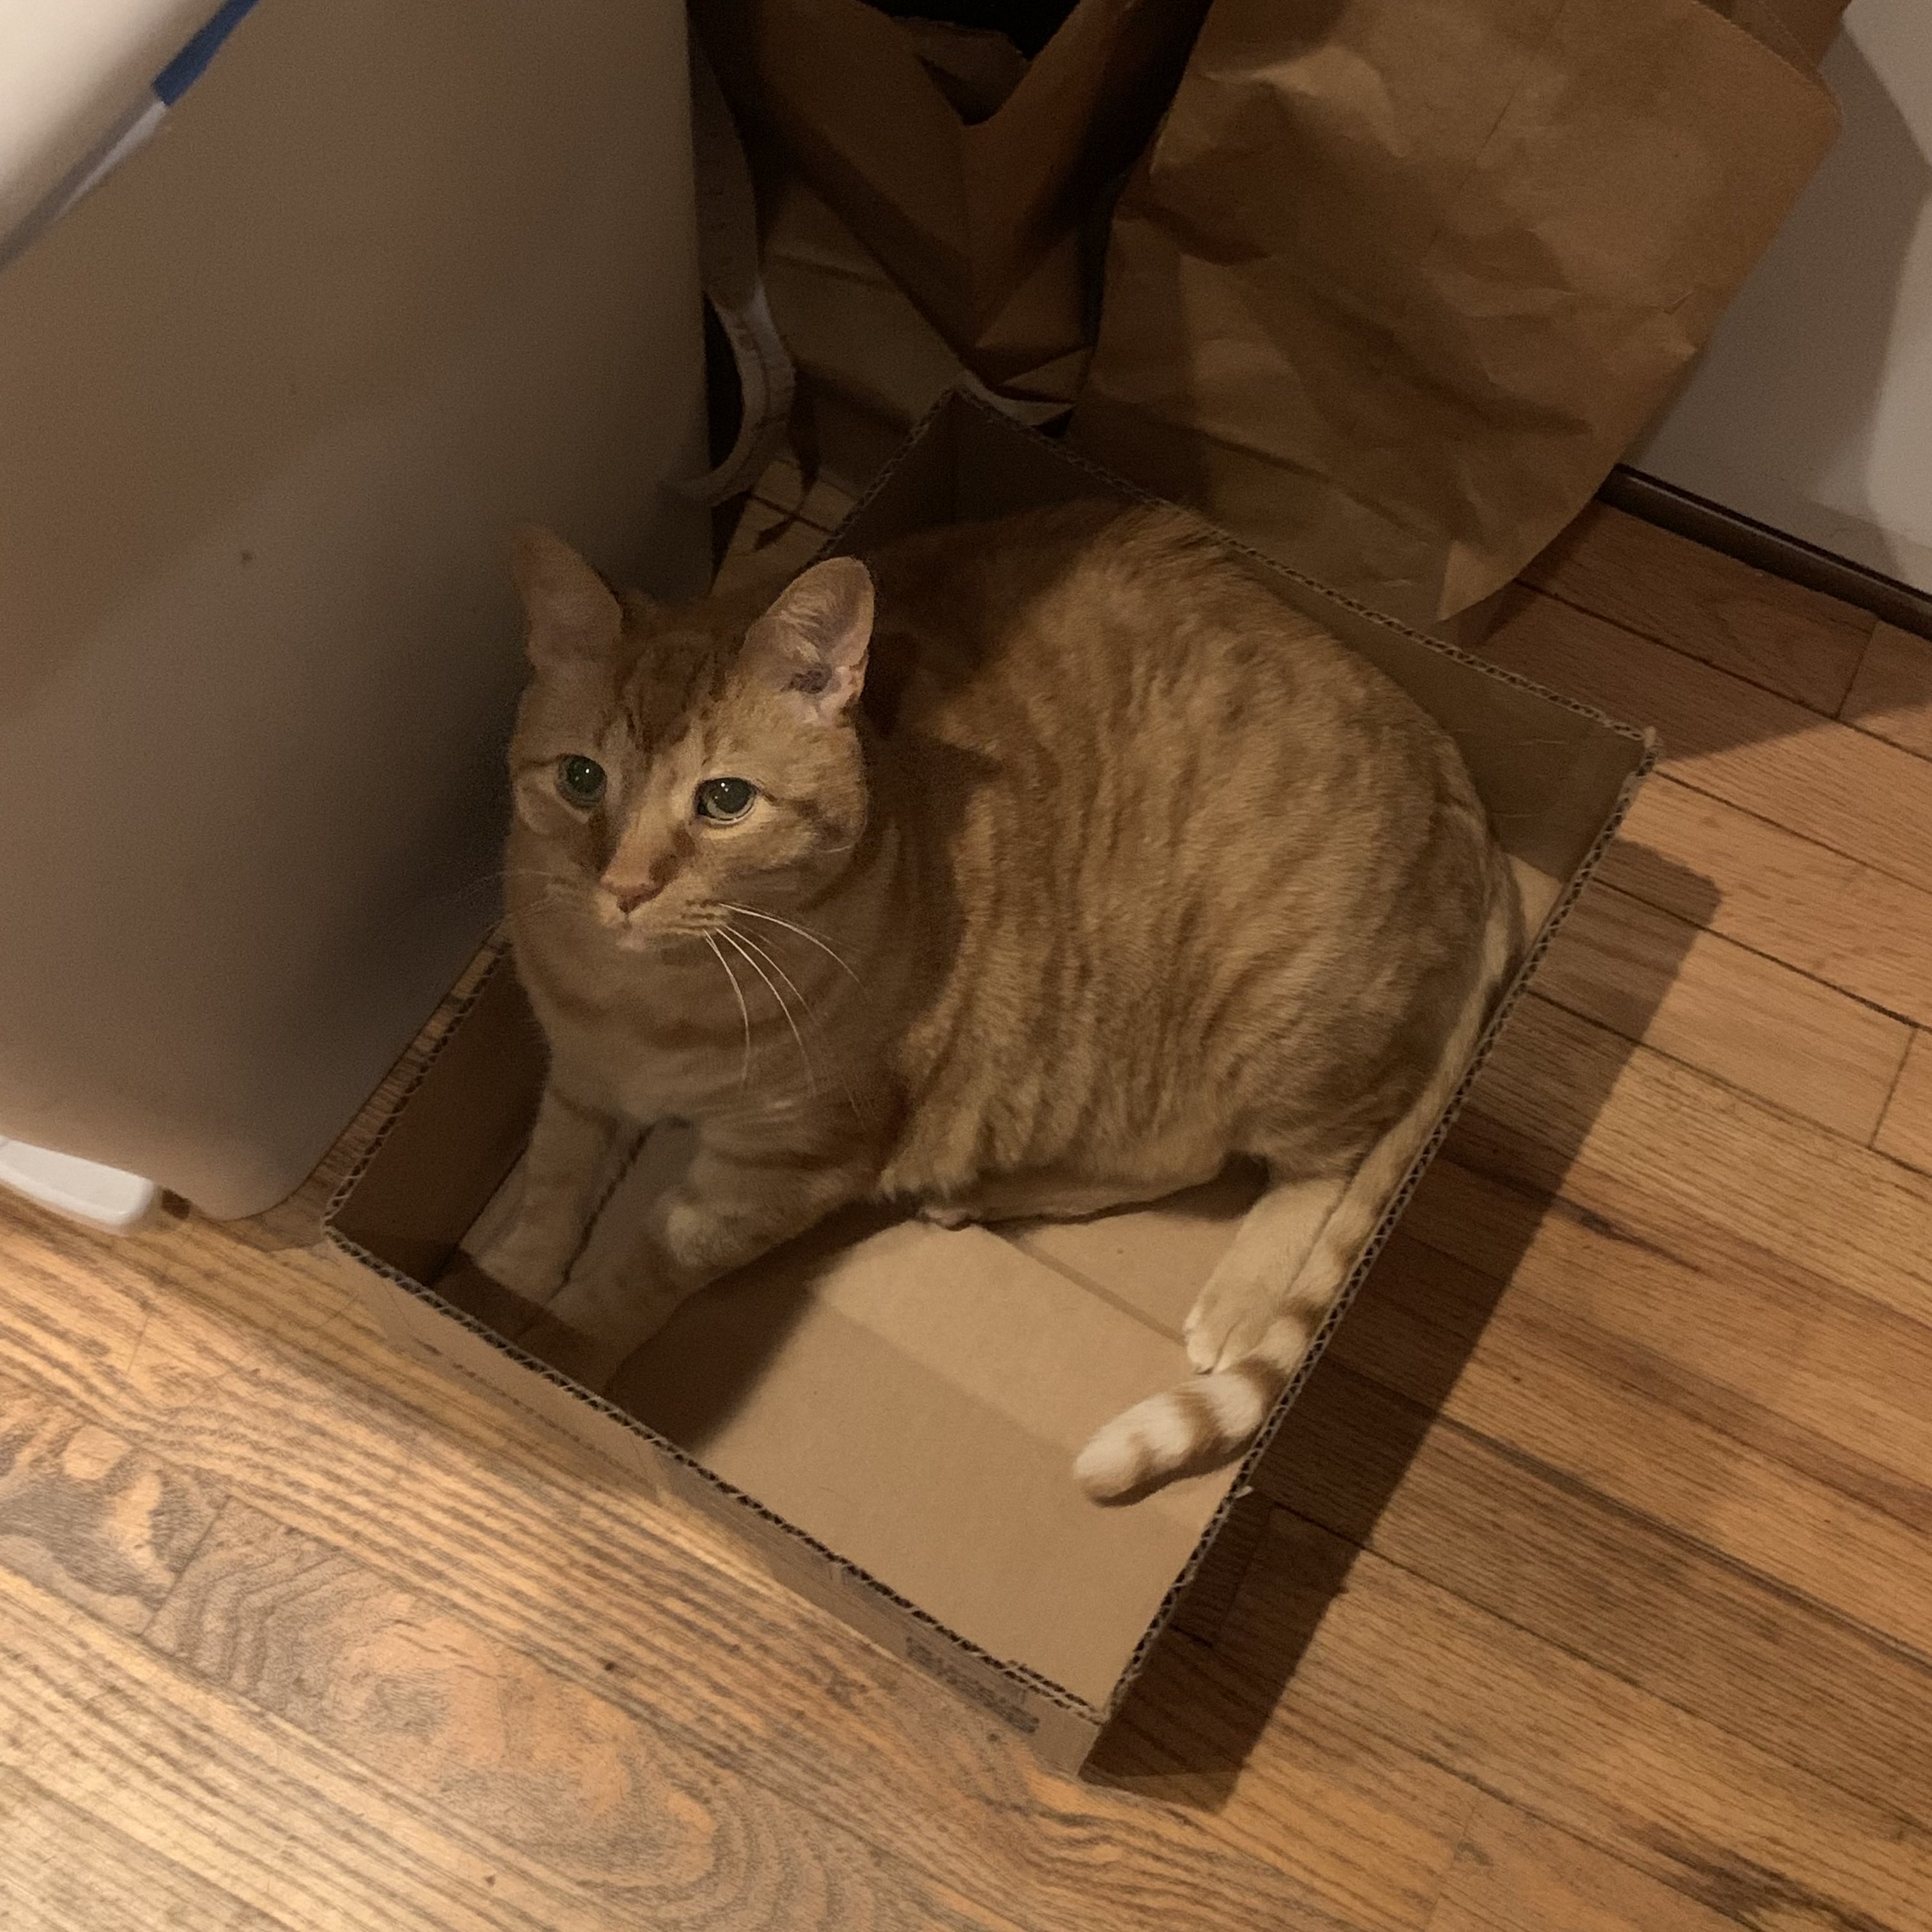 a picture of stanley sitting inside a cardboard box next to a trashcan. he is looking calmly up at the viewer